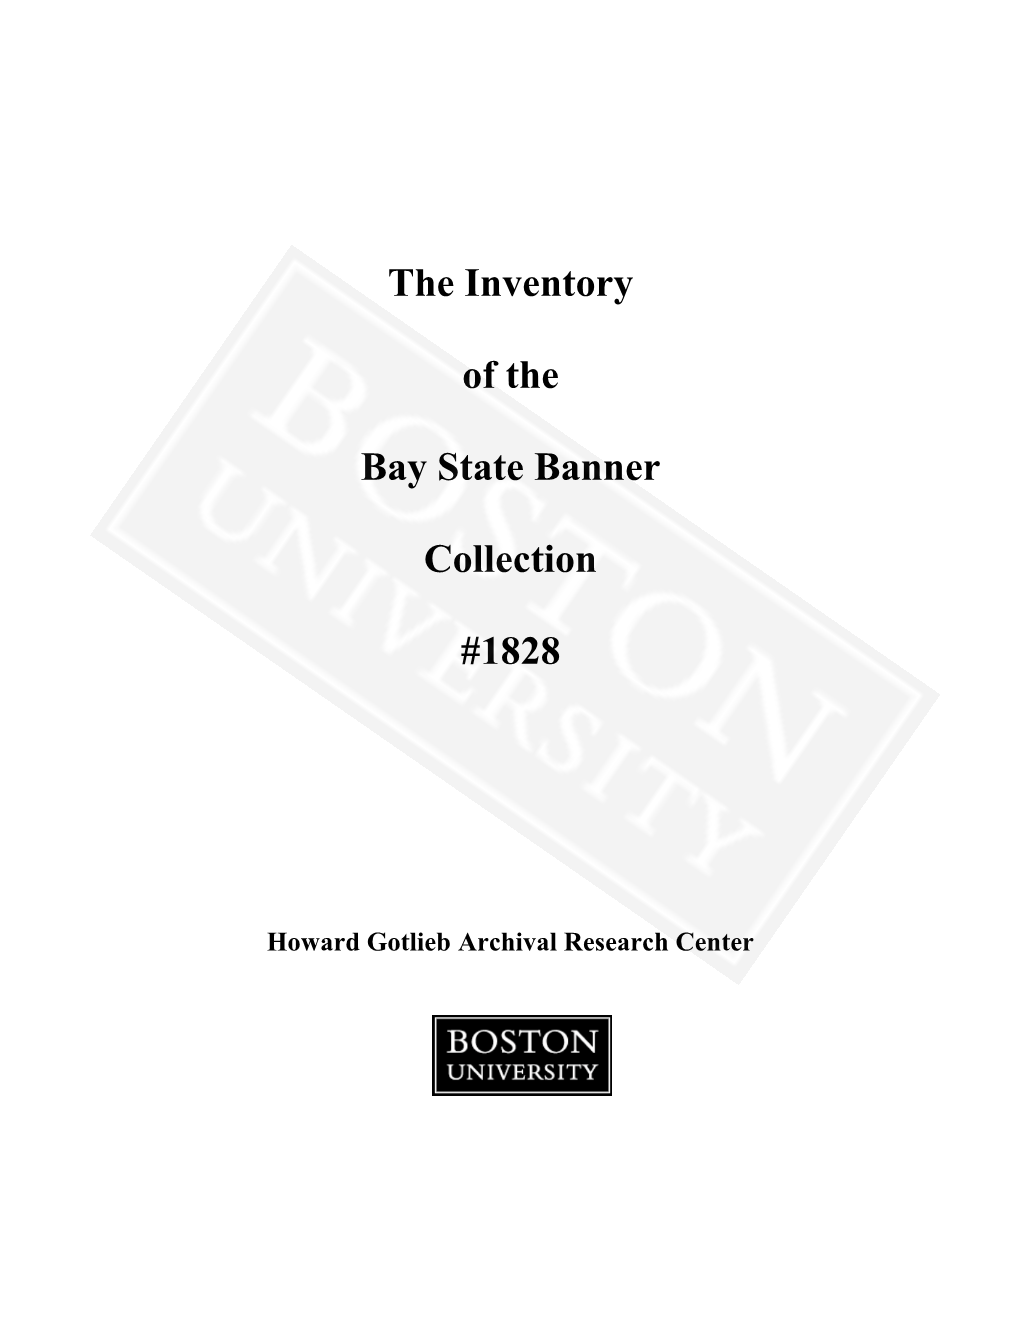 The Inventory of the Bay State Banner Collection #1828